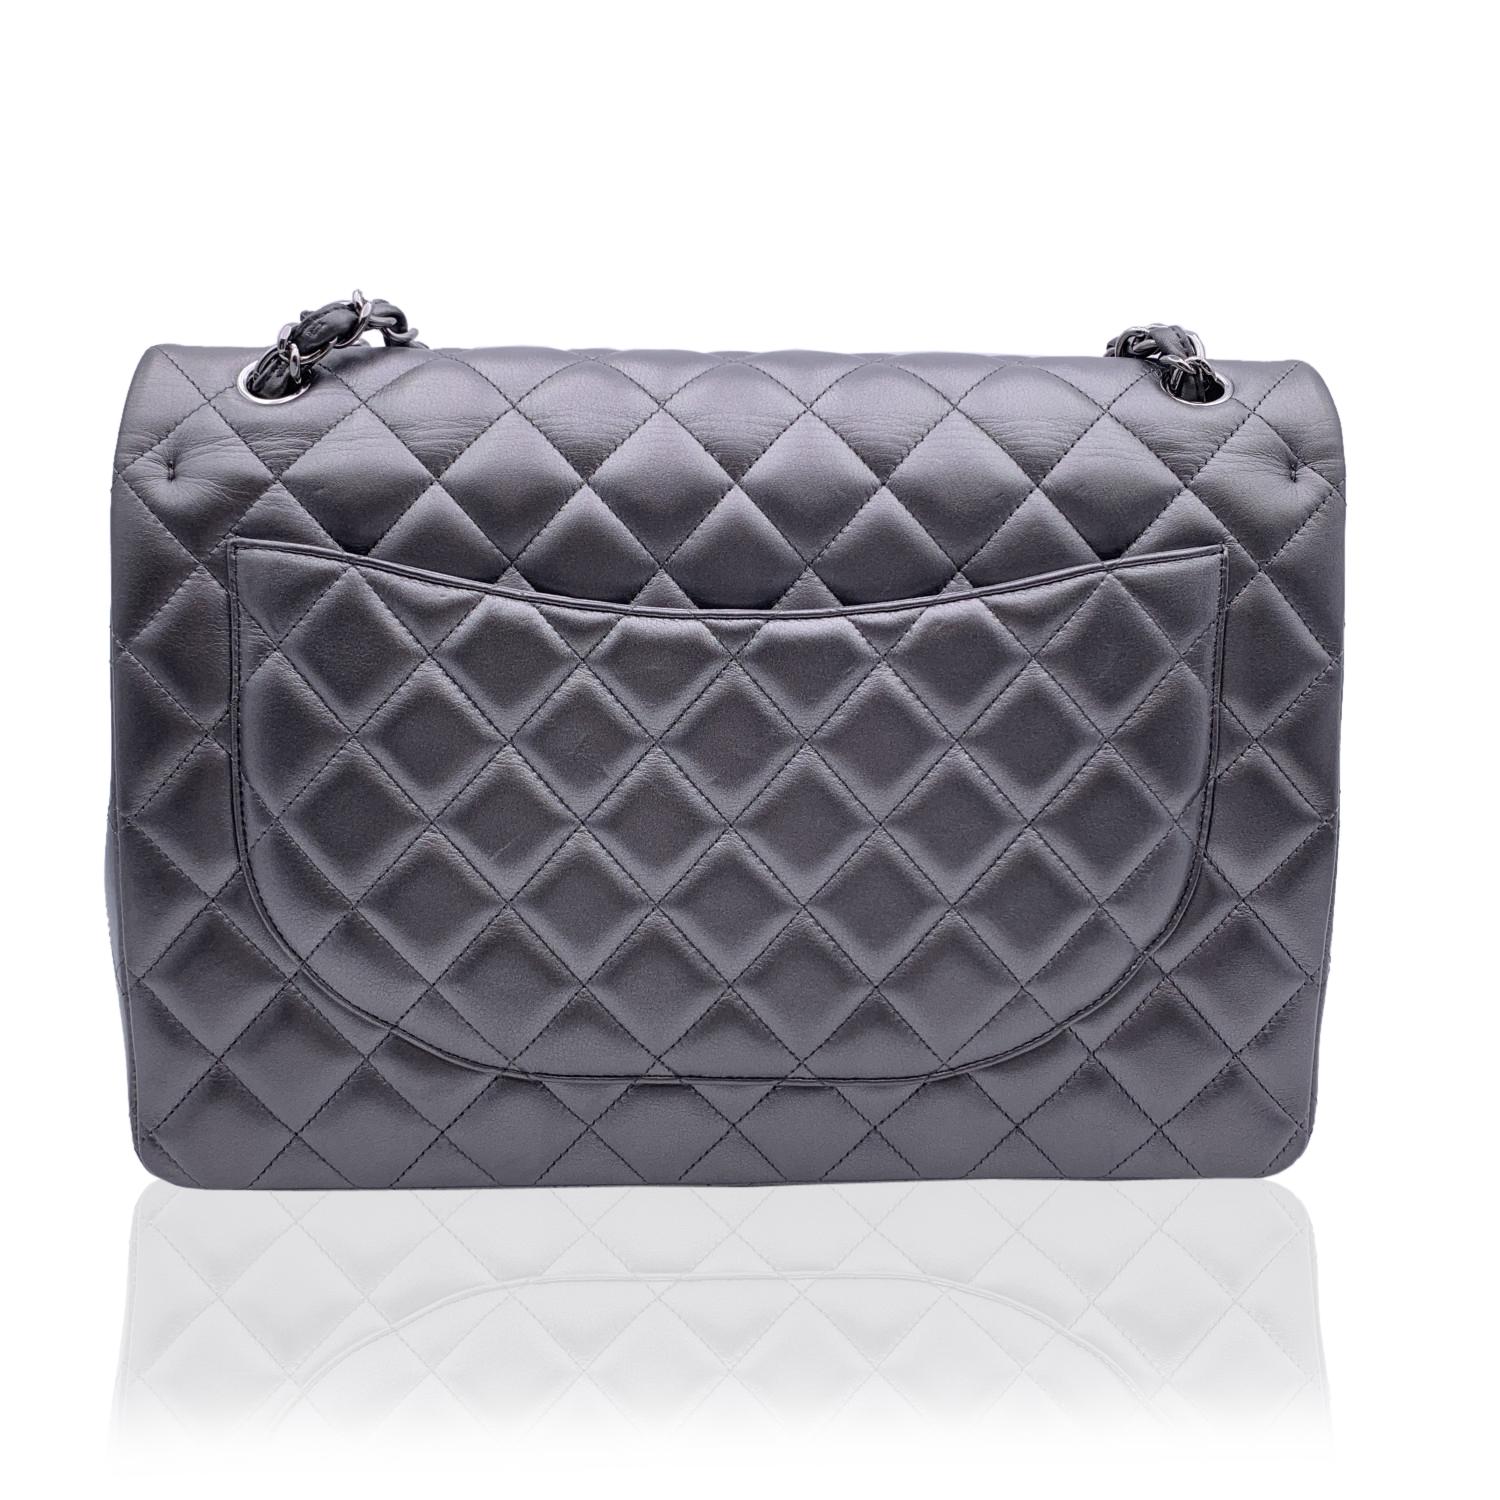 Chanel Grey Metallic Quilted Leather Classic Maxi Double Flap Bag In Excellent Condition In Rome, Rome